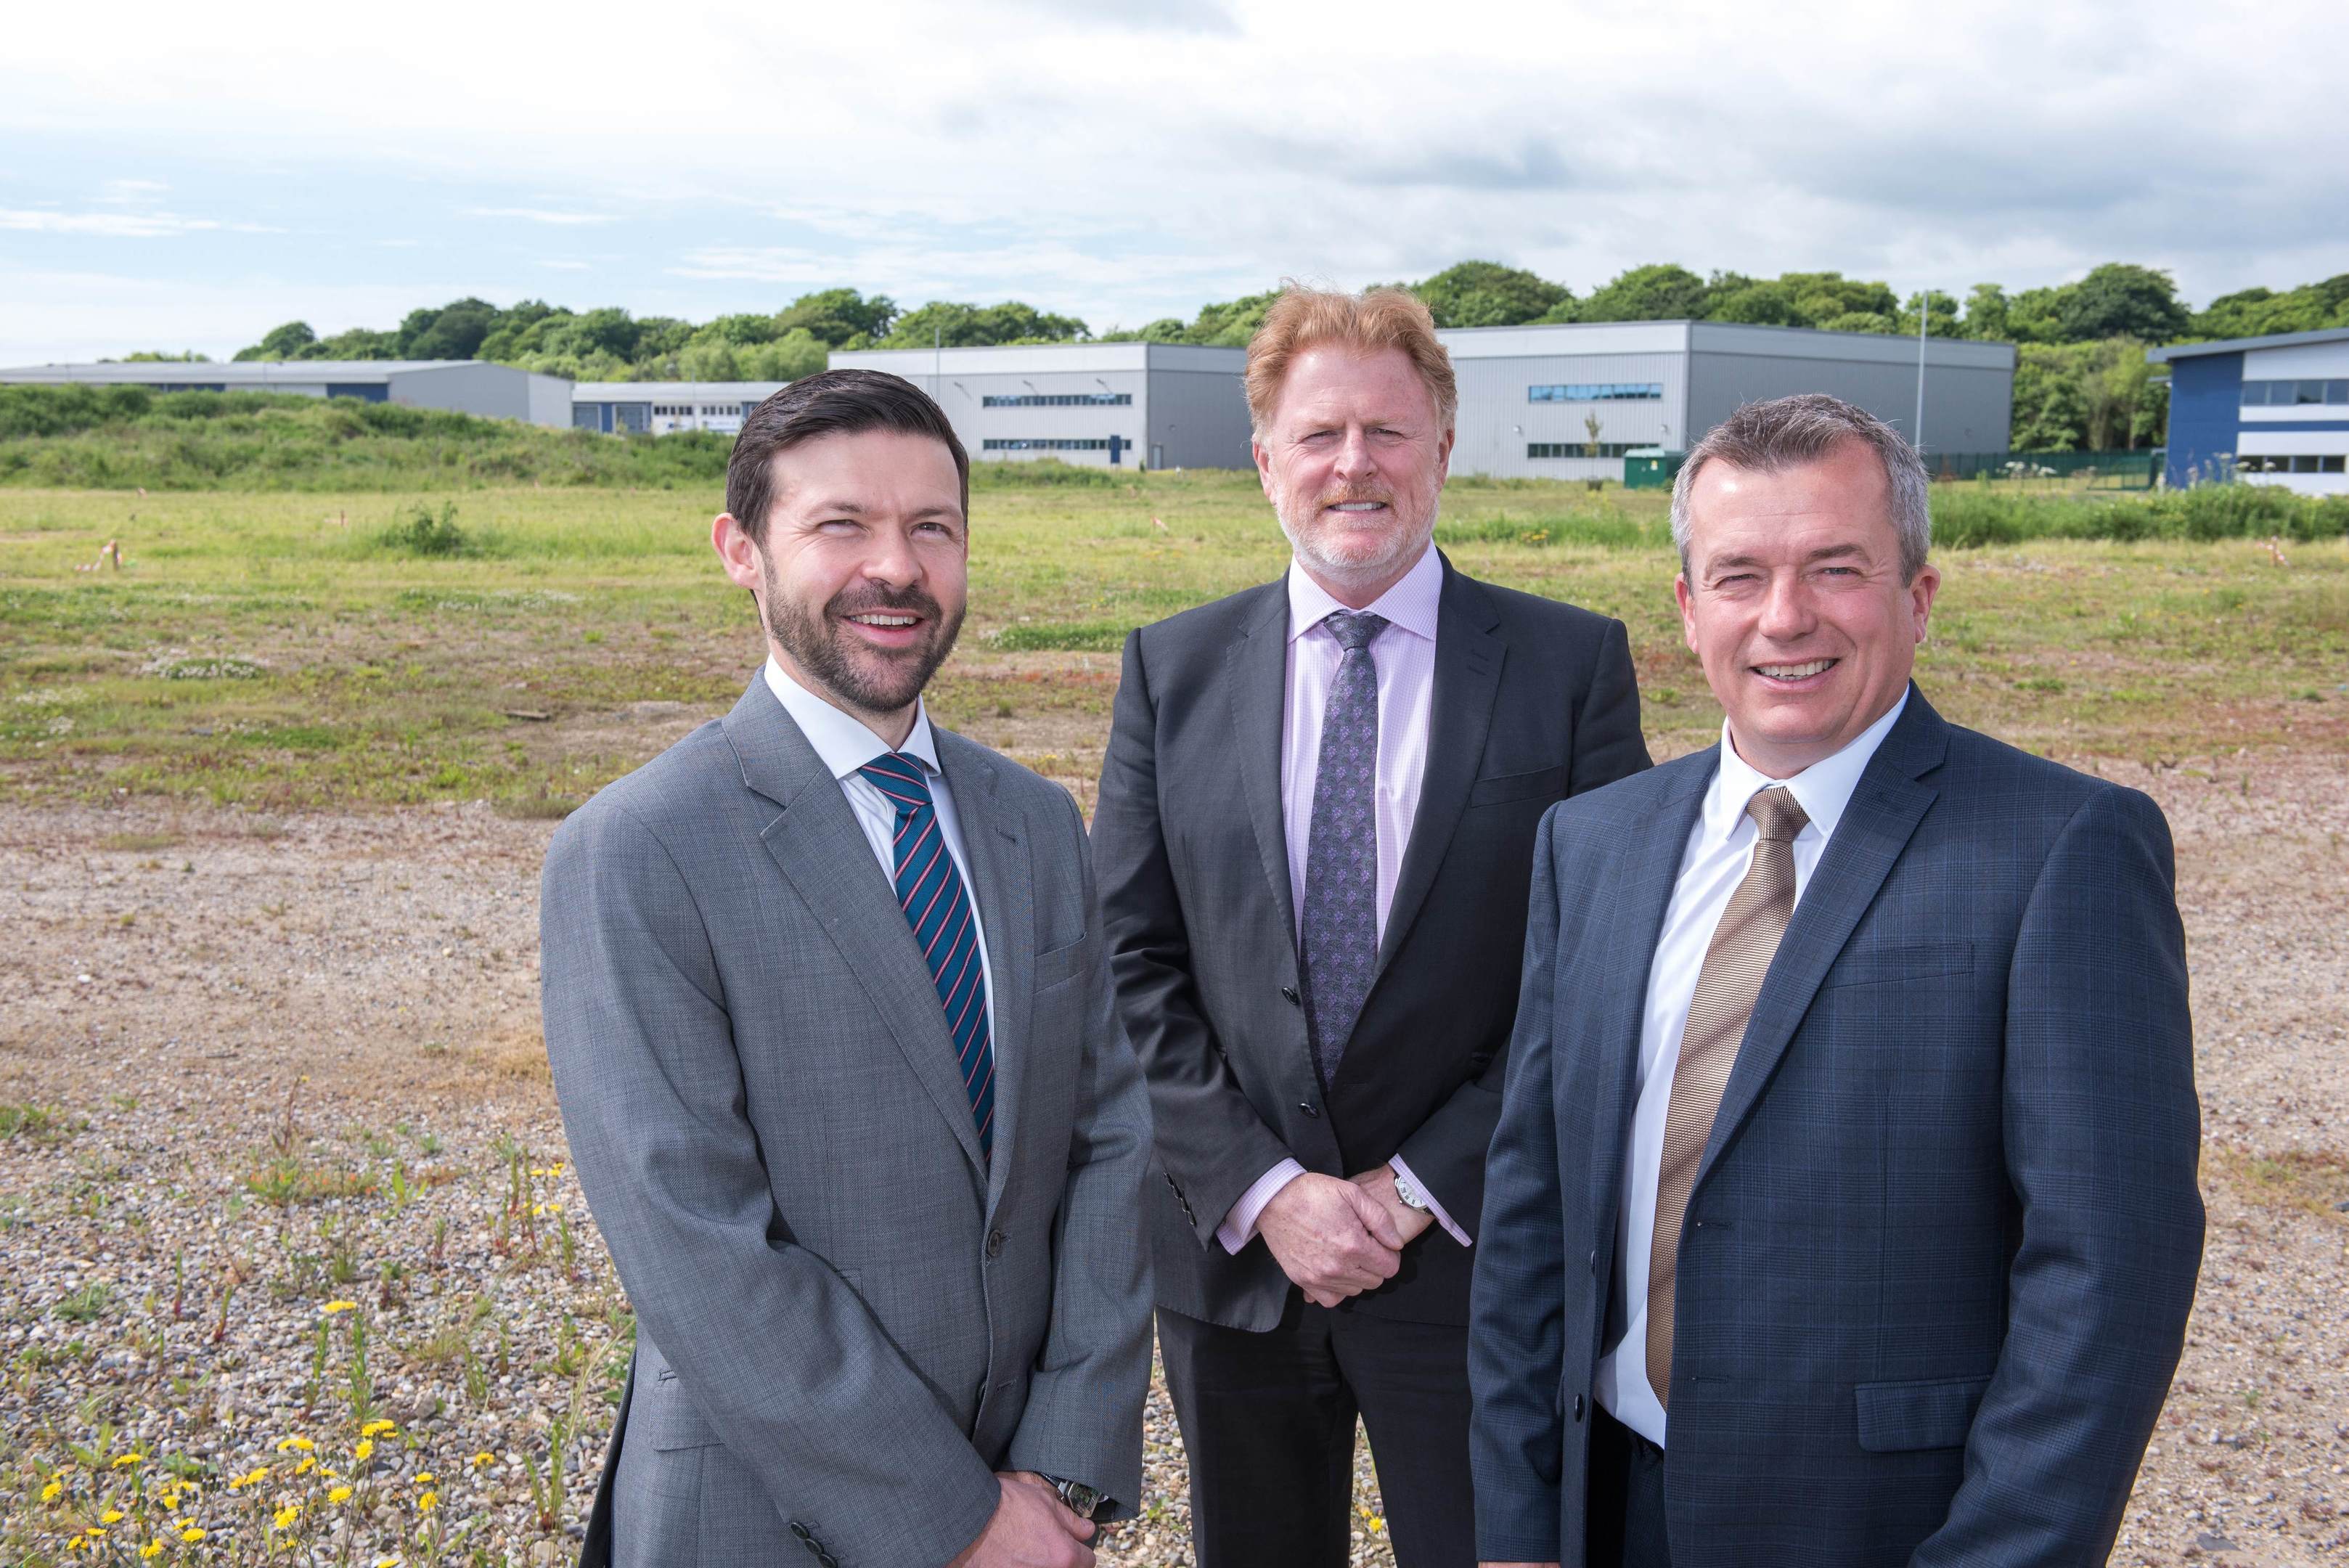 Simon Harvey, Proserv’s head of operation at Great Yarmouth, David Lamont, CEO, and Iain Smith, region president  for UK and Europe, at the site of the company’s new facility in Great Yarmouth.